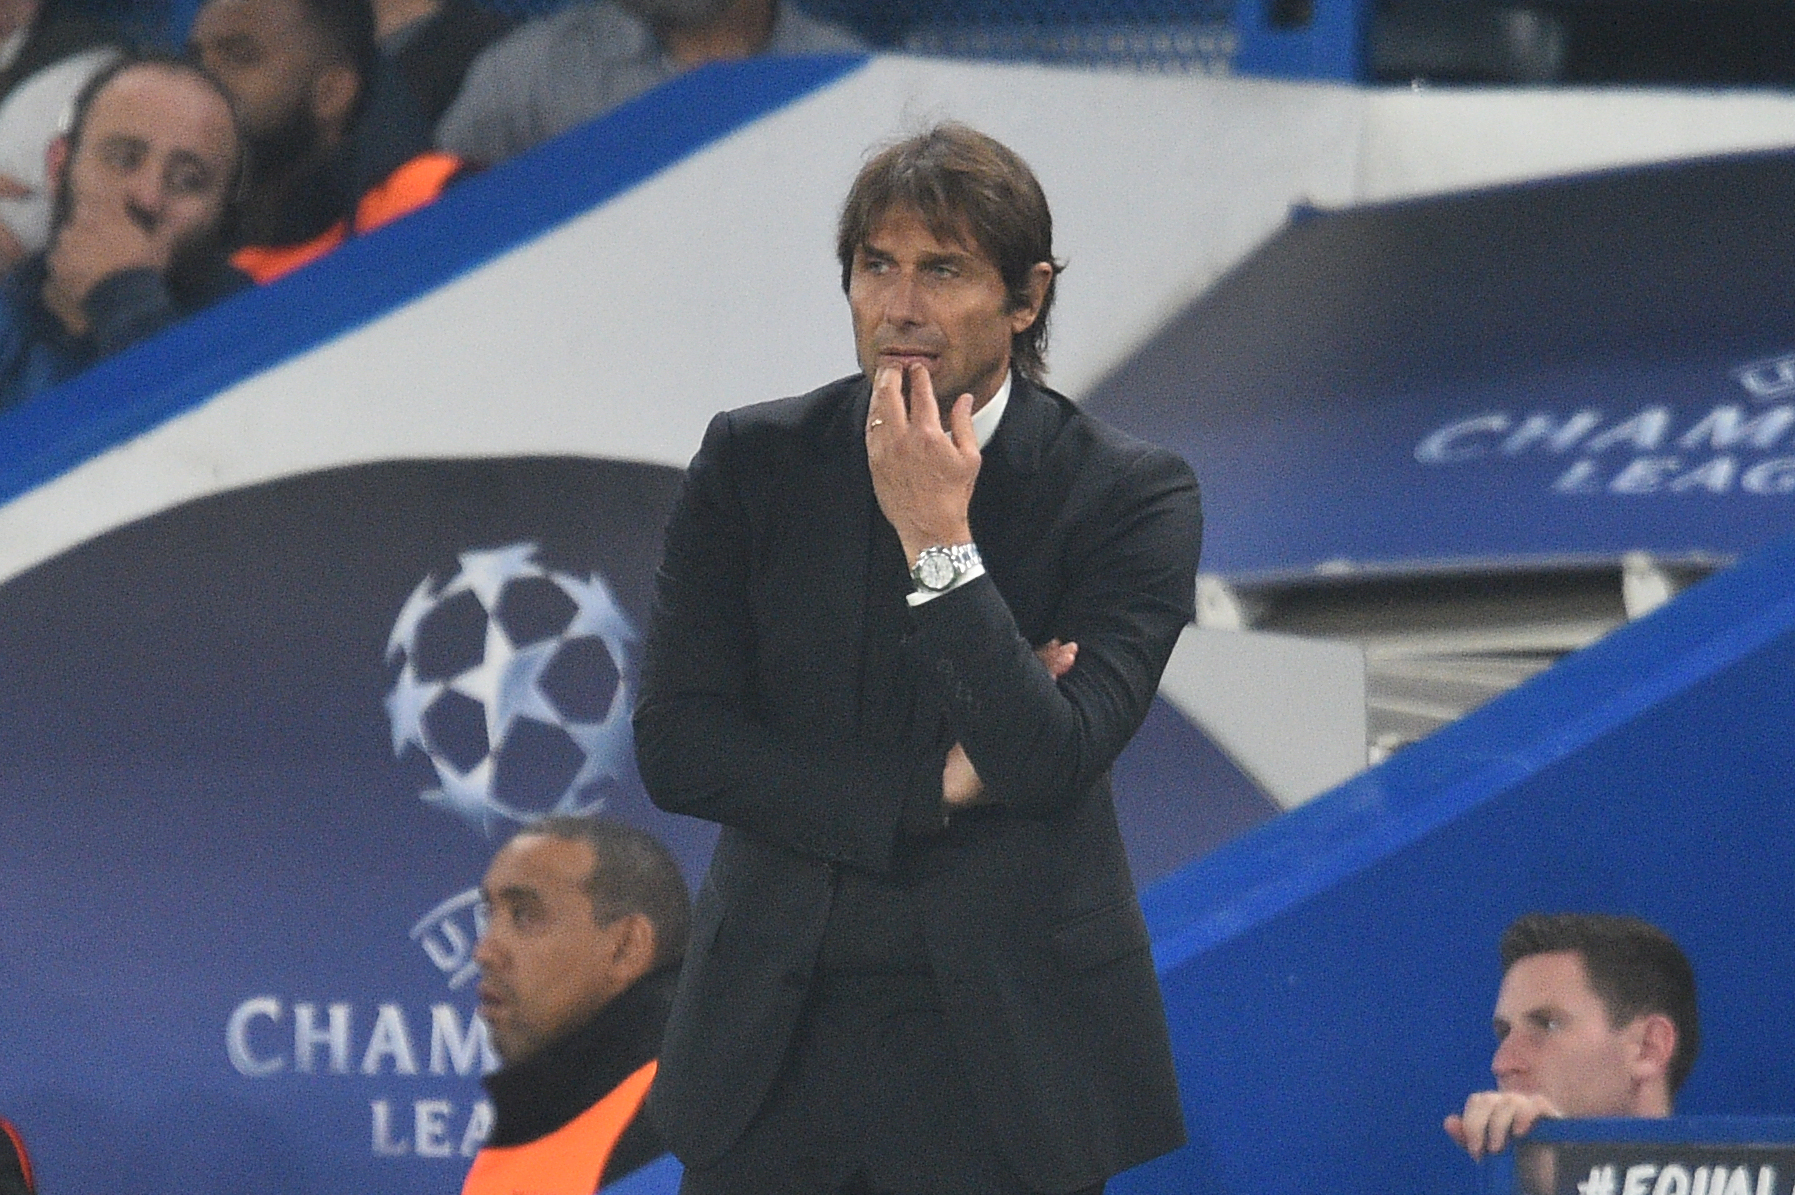 Chelsea's Italian head coach Antonio Conte looks on during a UEFA Champions league group stage football match between Chelsea and Roma at Stamford Bridge in London on October 18, 2017. / AFP PHOTO / Glyn KIRK        (Photo credit should read GLYN KIRK/AFP/Getty Images)